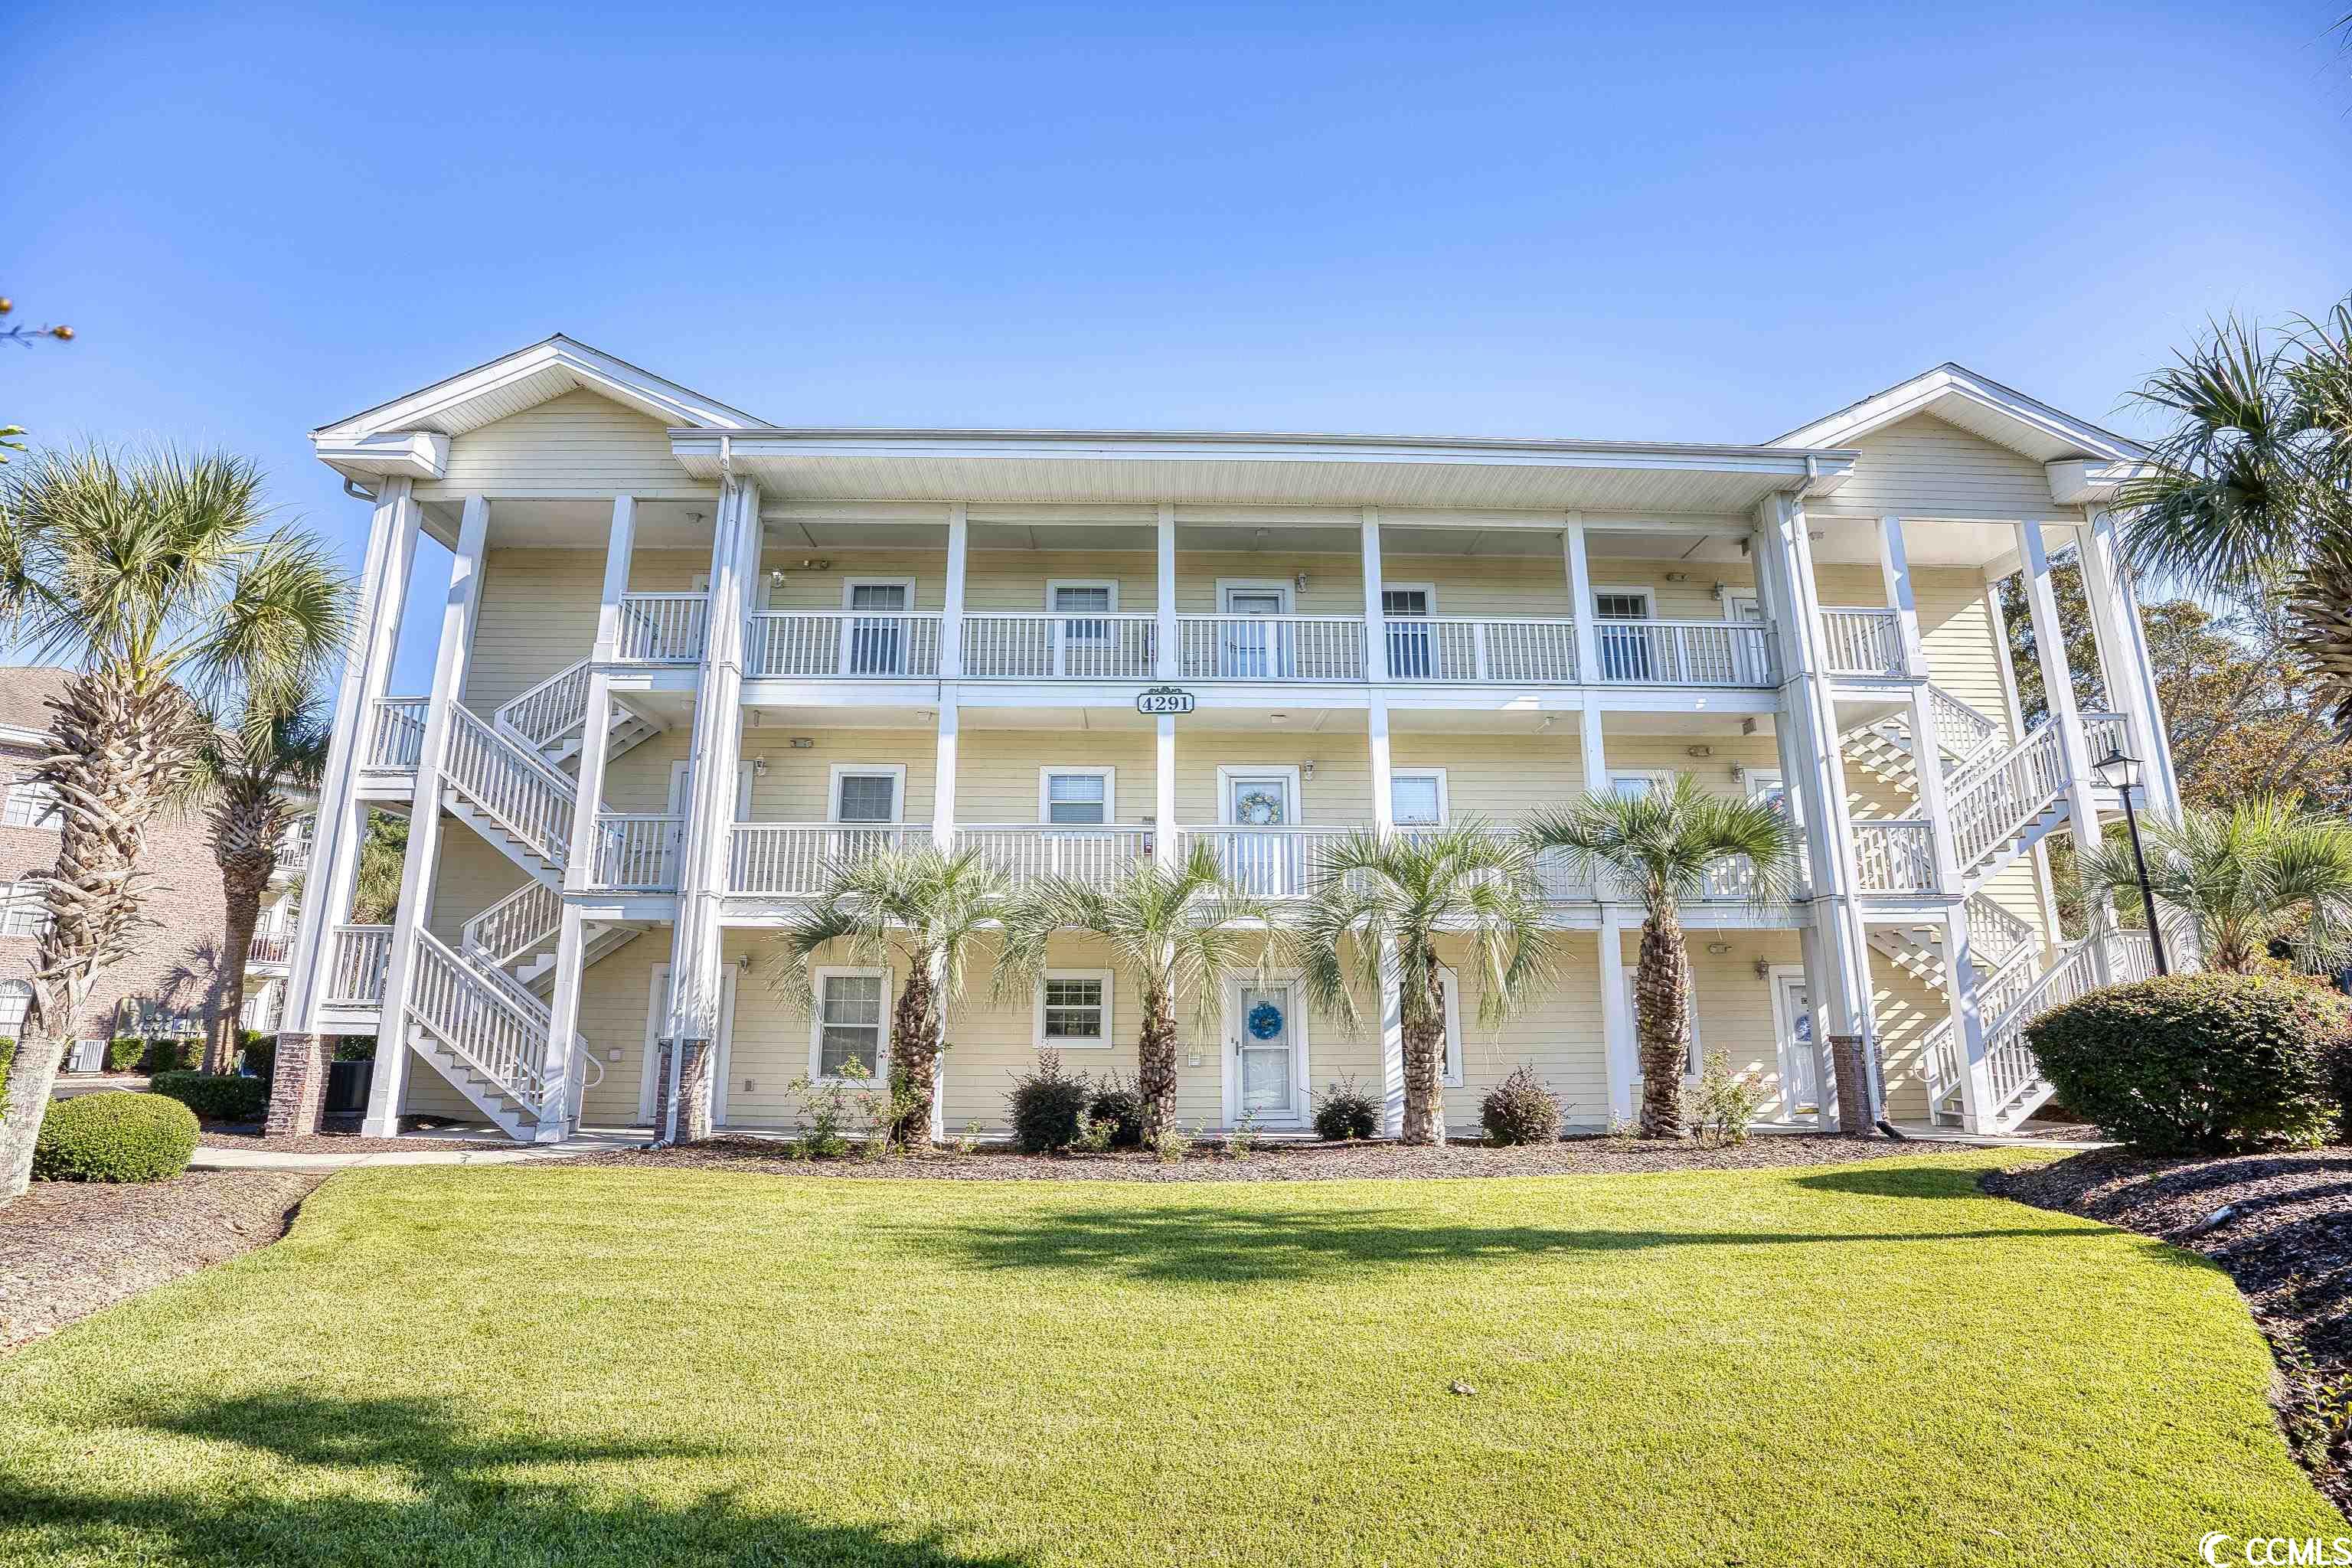 beautiful, top floor unit located in the heart of little river.  two bedrooms and two full baths overlooking the pool.  quiet community with pools and bbq's for your enjoyment.  being sold completely furnished and turn-key ready.  close to south and north carolina beaches and all shopping, golfing, restaurants and entertainment.  enjoy the little river water front with many restaurants, casino boat, fresh sea food right off the boats, the annual blue crab and shrimp festivals.